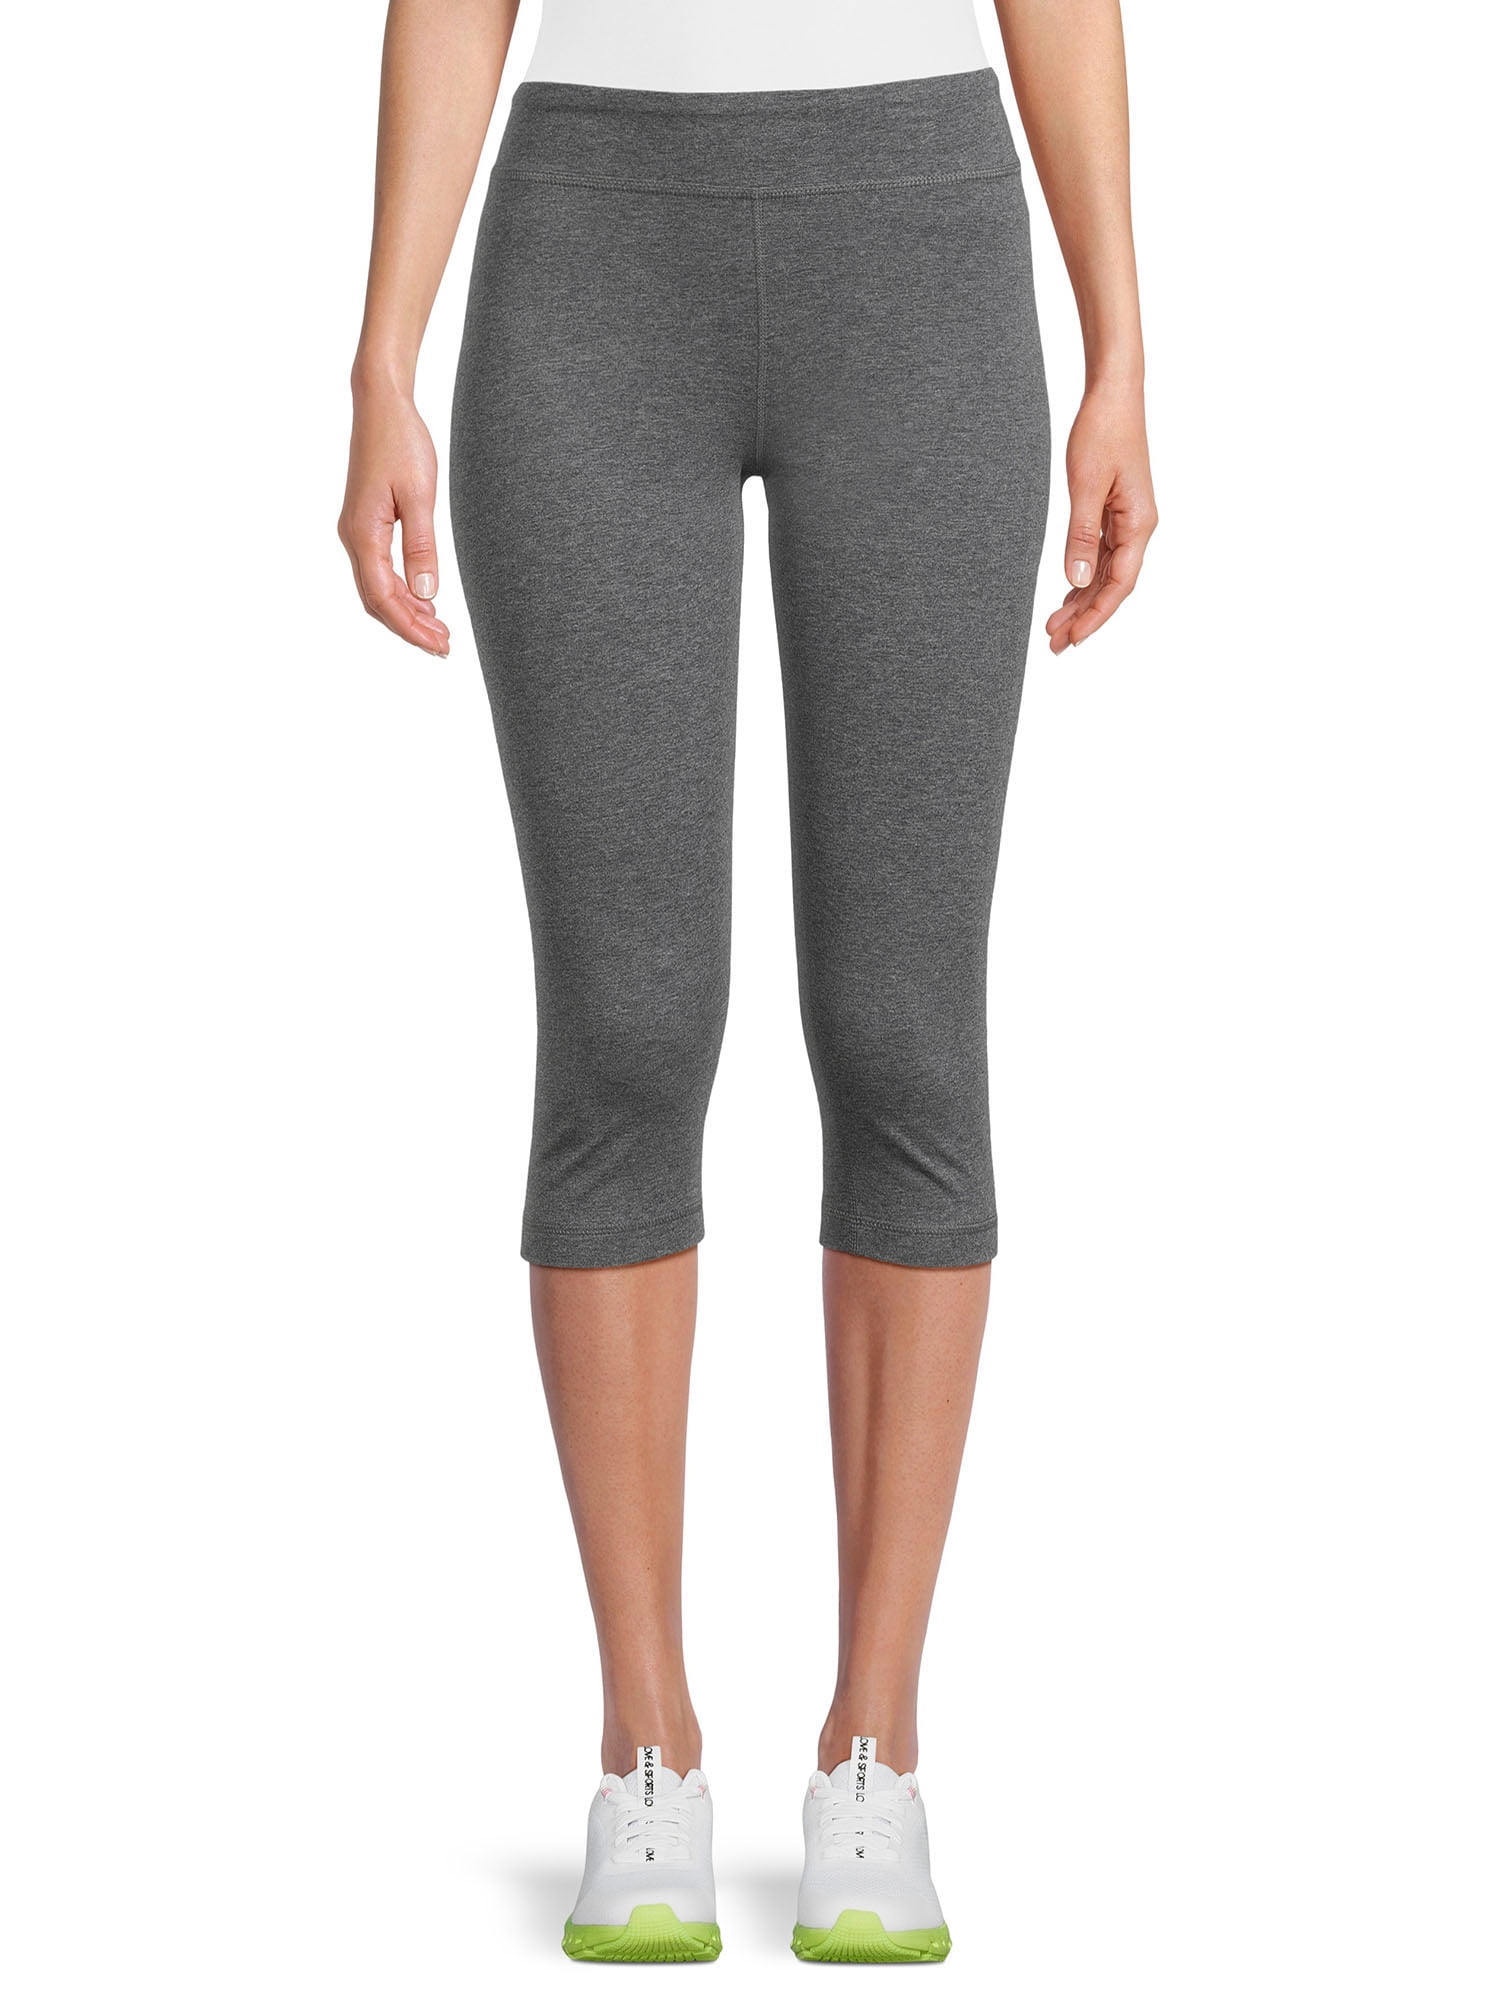 Athletic Works Women's Capris With Side Pockets | lupon.gov.ph